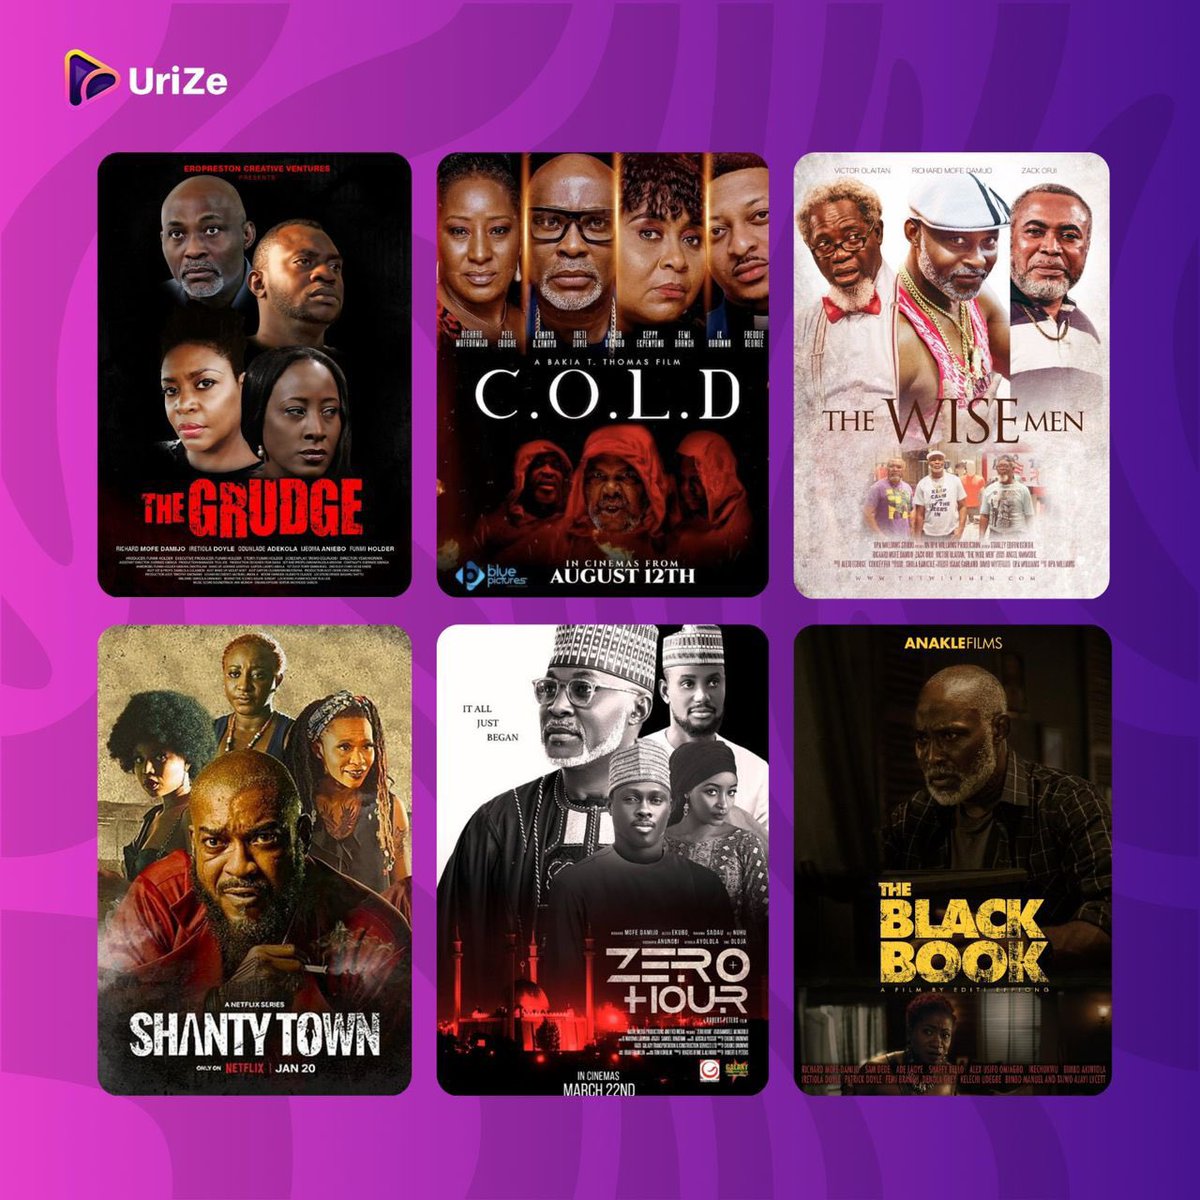 A Nollywood veteran for a reason, Richard Mofe-Damijo popularly known as RMD, has given us stellar performances that showcase his talent and artistry over the years 🎞️

Rate your favourite RMD movies on 1-10! 🍿
#UriZe #RMDSaysSo #RMD #ColdTheMovie #TheWiseMen #LoveIsBlind